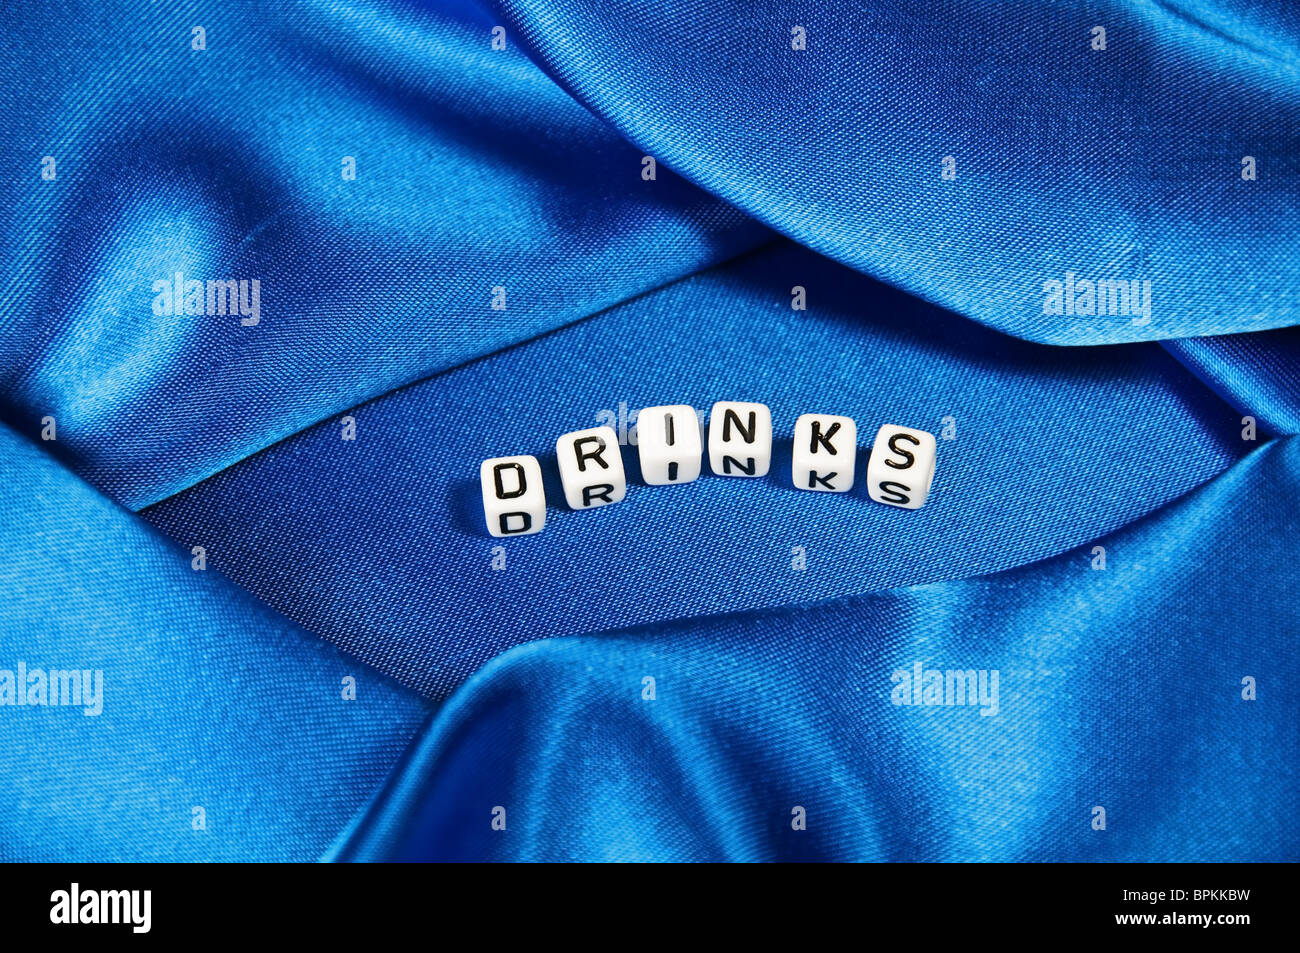 Royal blue satin background with rich folds and wrinkles for texture is the word drinks in black and white cube lettering series Stock Photo